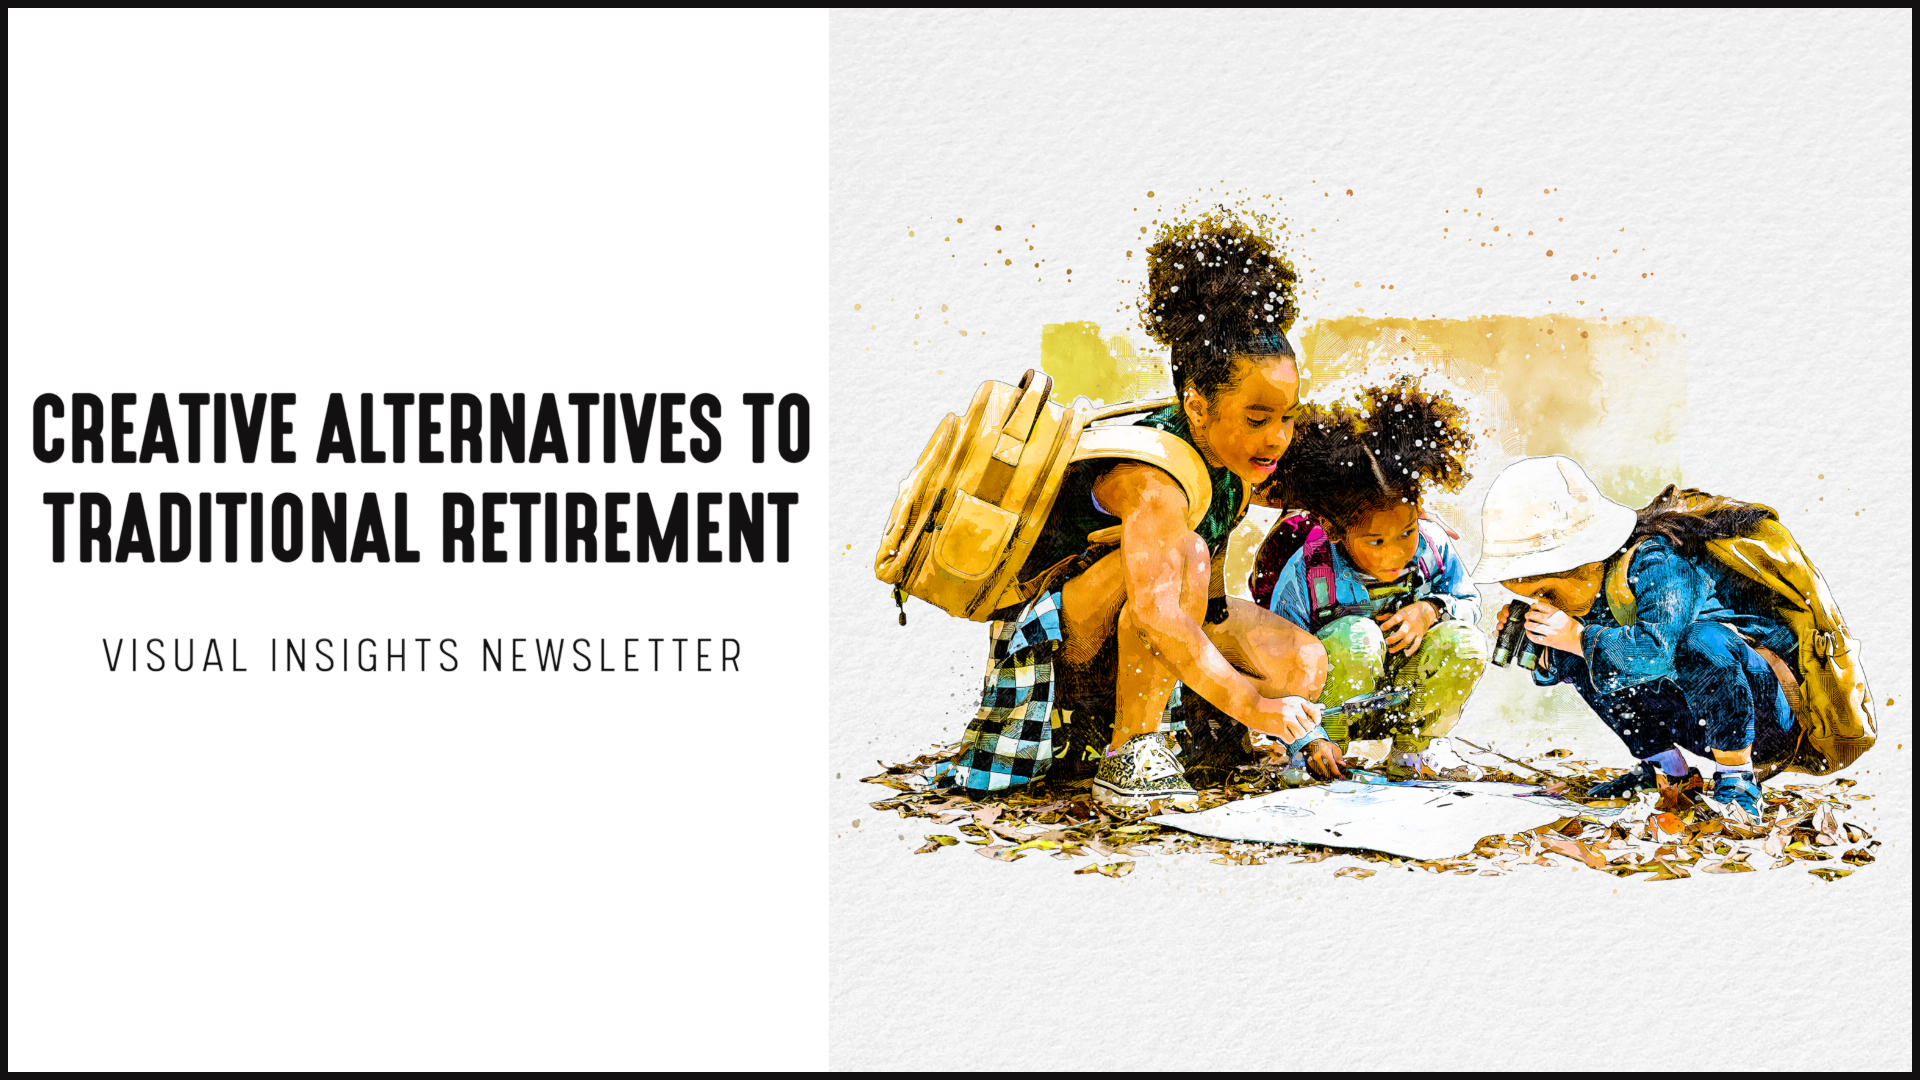 [NEW] Visual Insights Newsletter | Creative Alternatives to Traditional Retirement